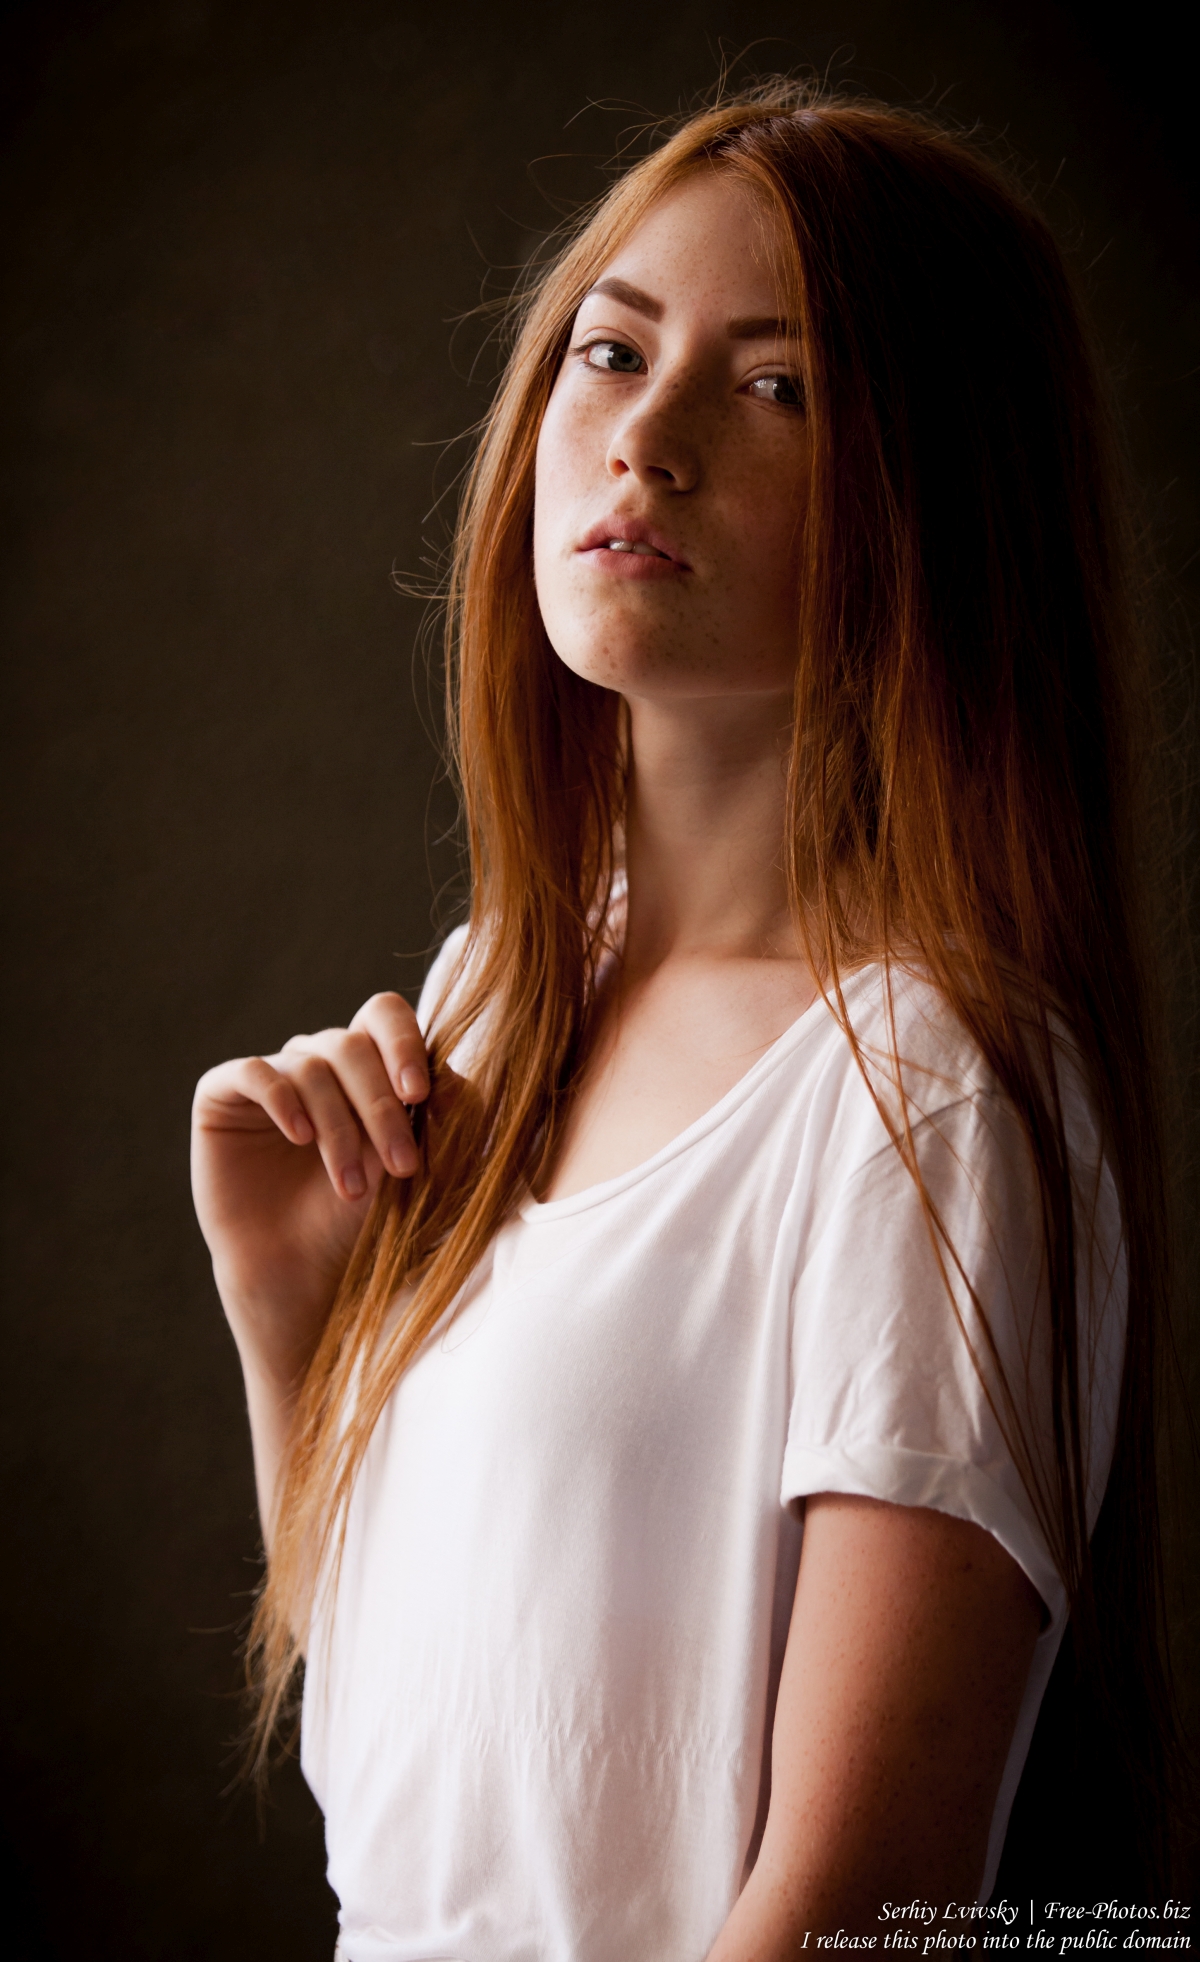 a_15-year-old_red-haired_catholic_girl_photographed_by_serhiy_lvivsky_in_august_2015_01